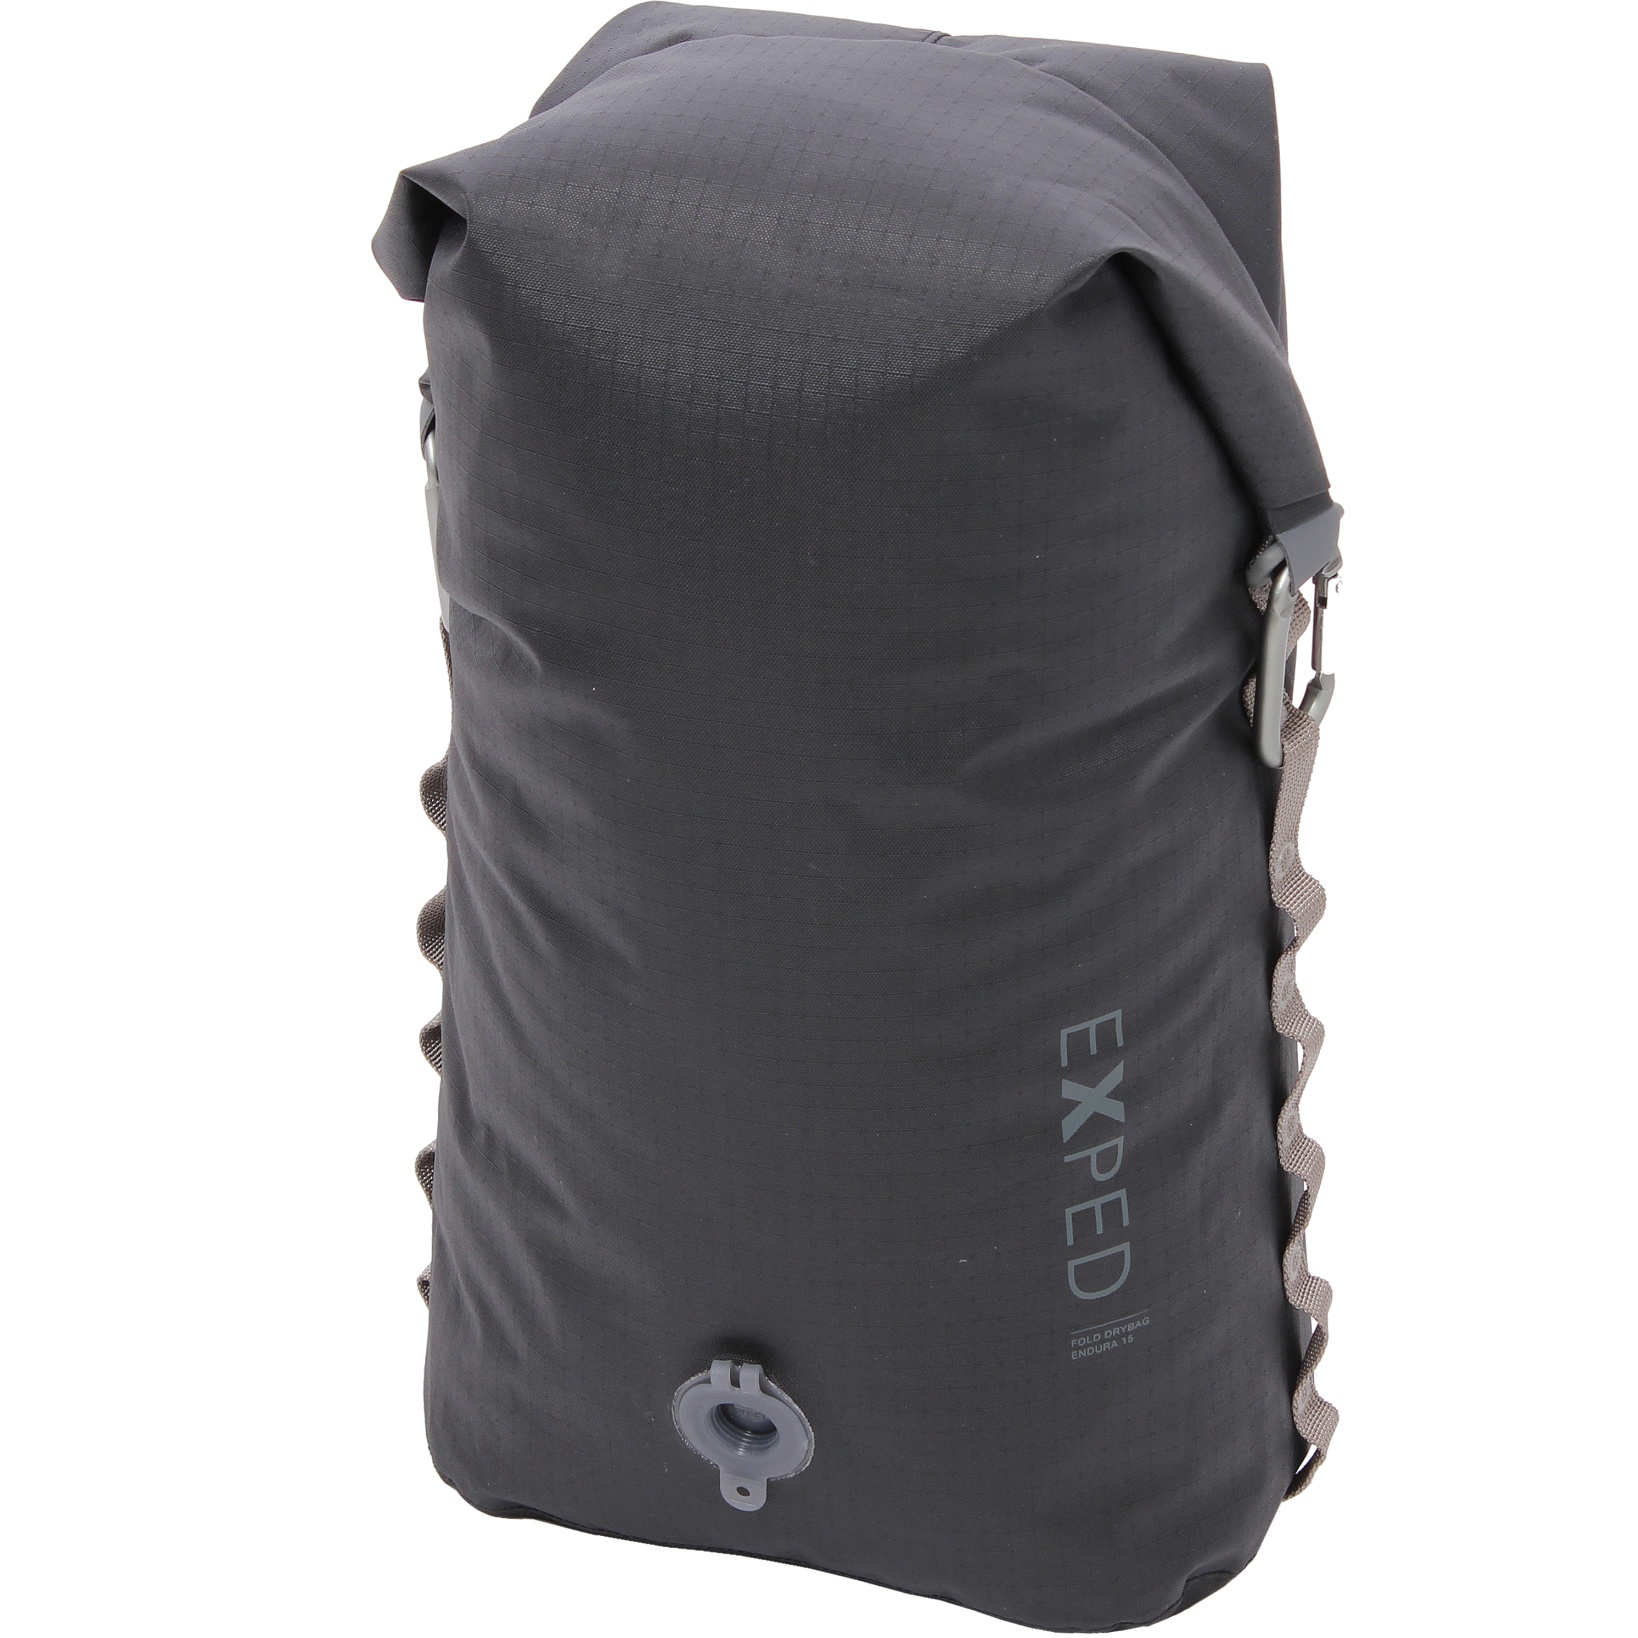 Picture of Exped Fold Drybag Endura - 15L - black